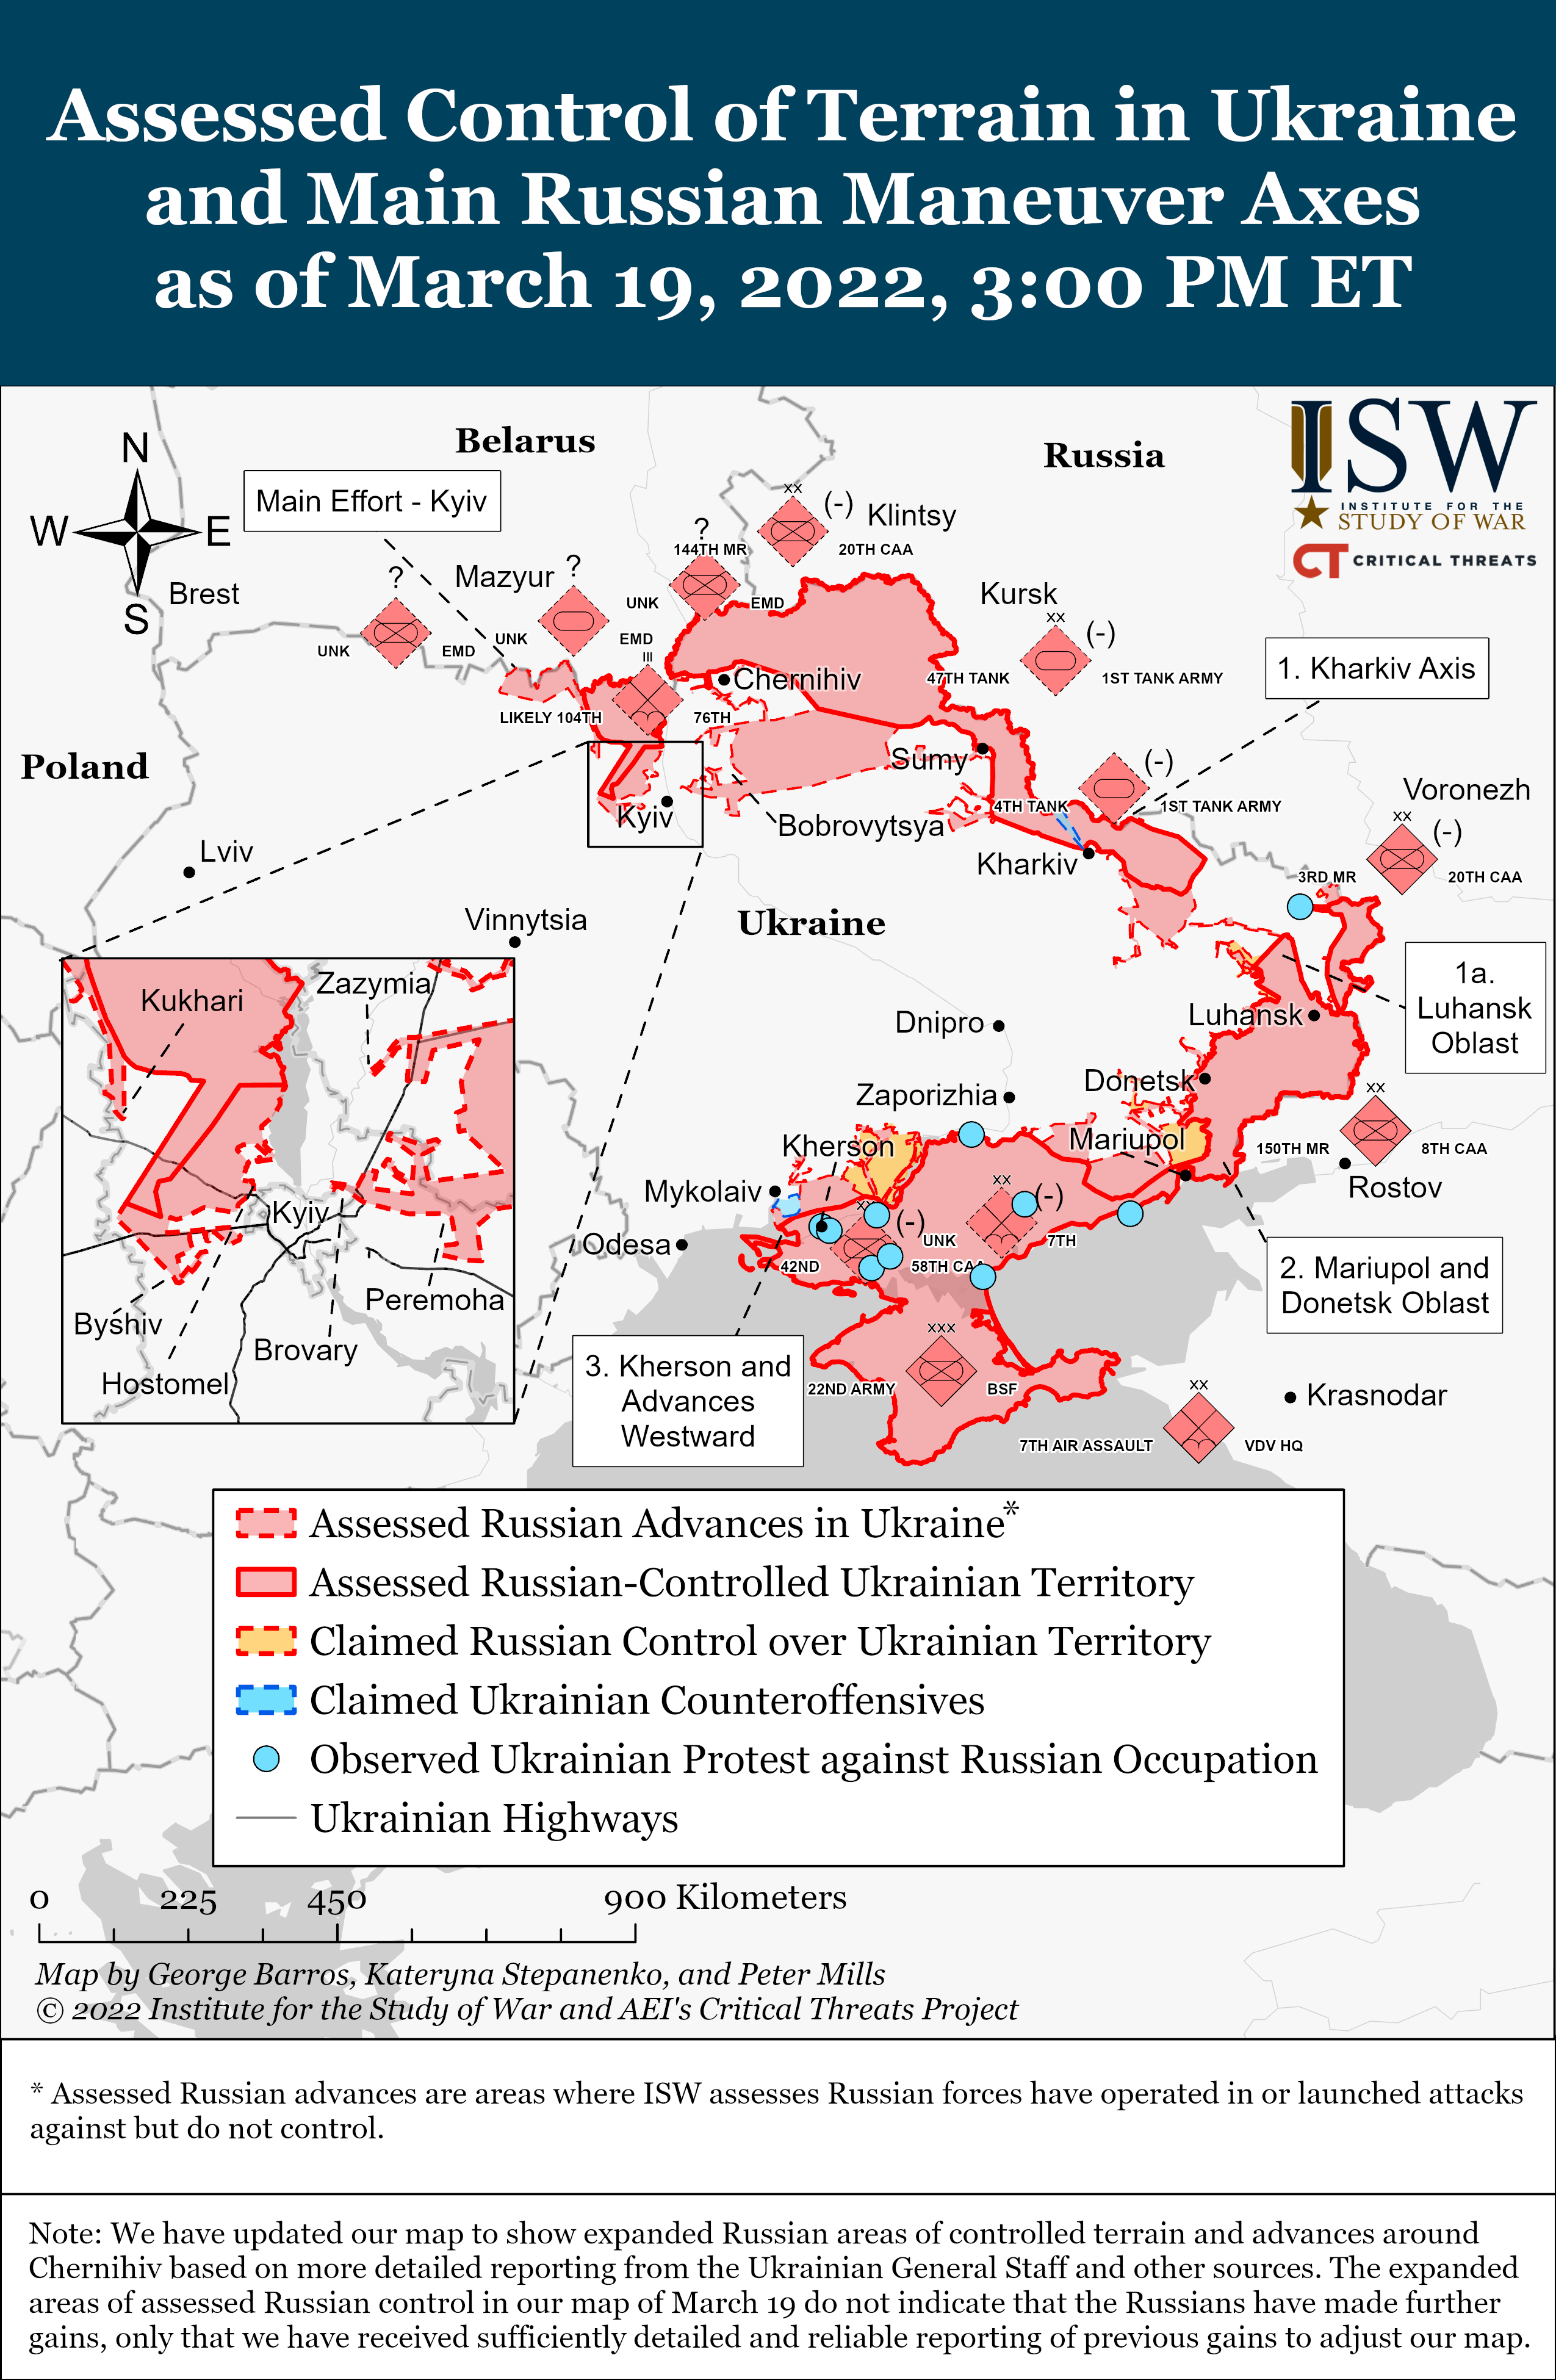 A control of terrain map for Ukraine on March 19, 2022